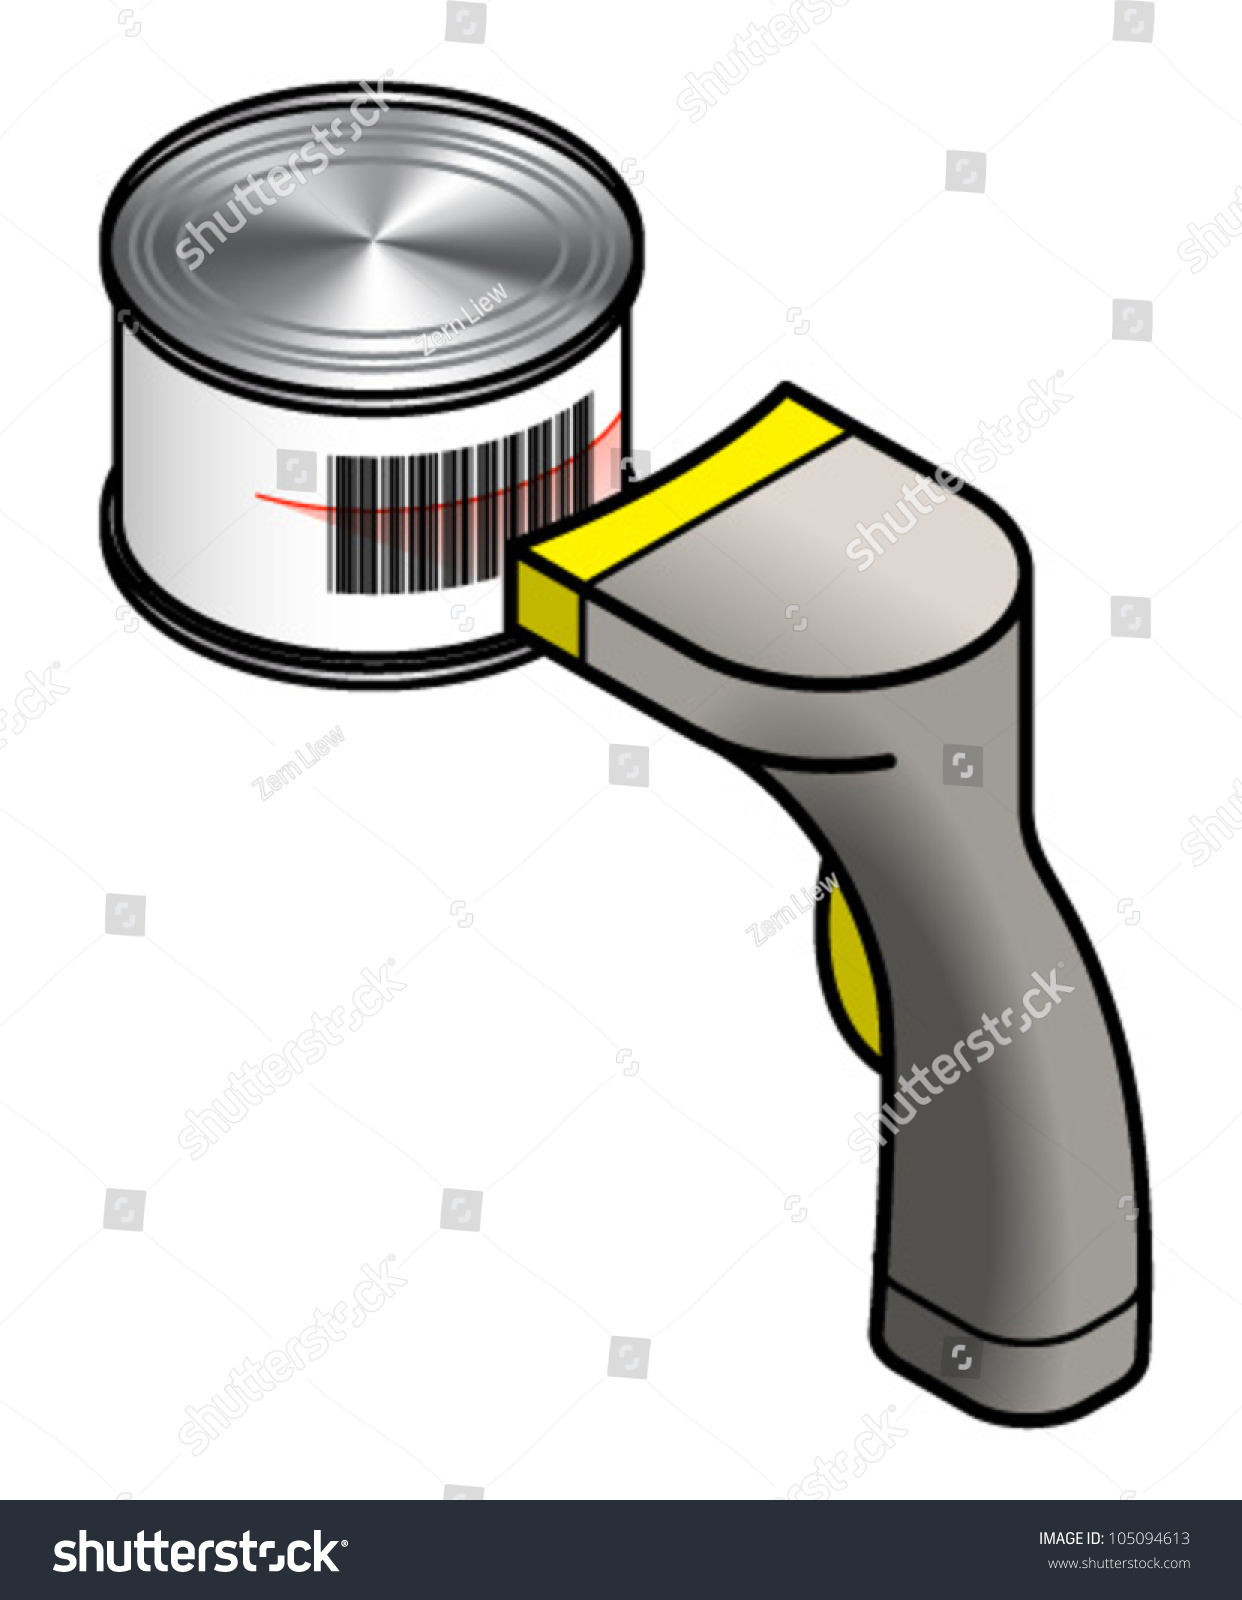 clipart barcode scanner - photo #44